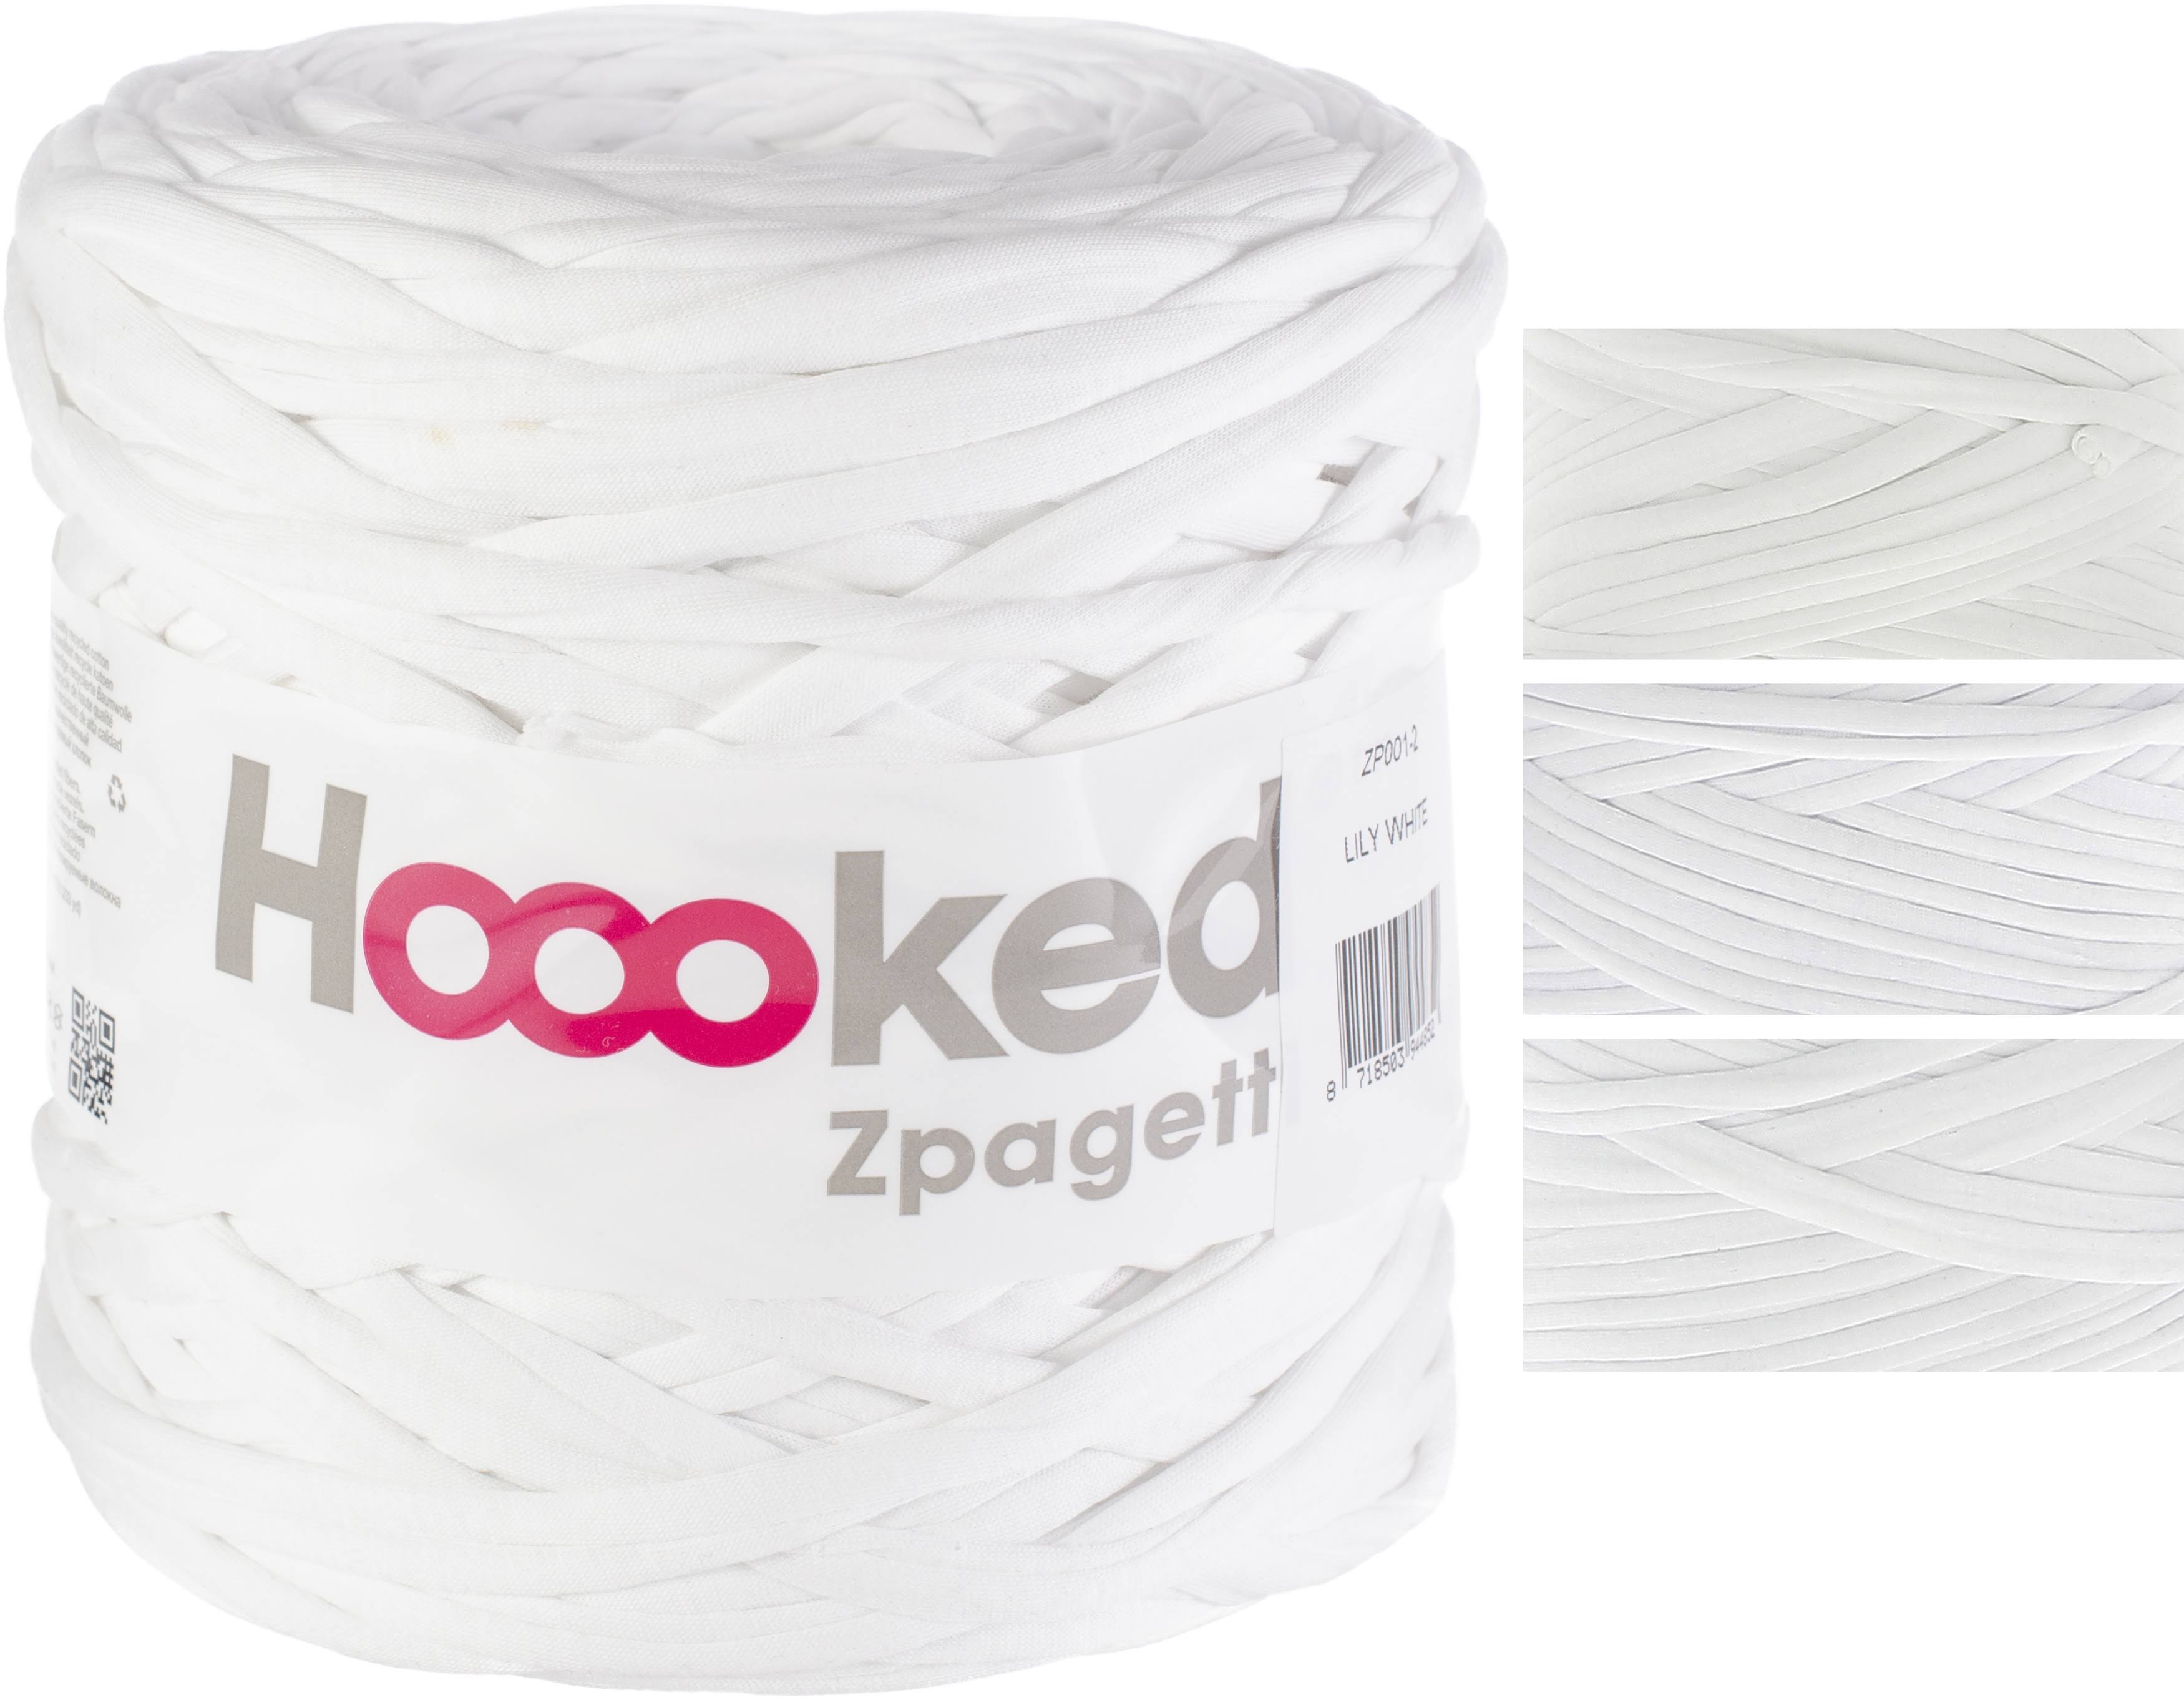 Hoooked Zpagetti Yarn-Lily White